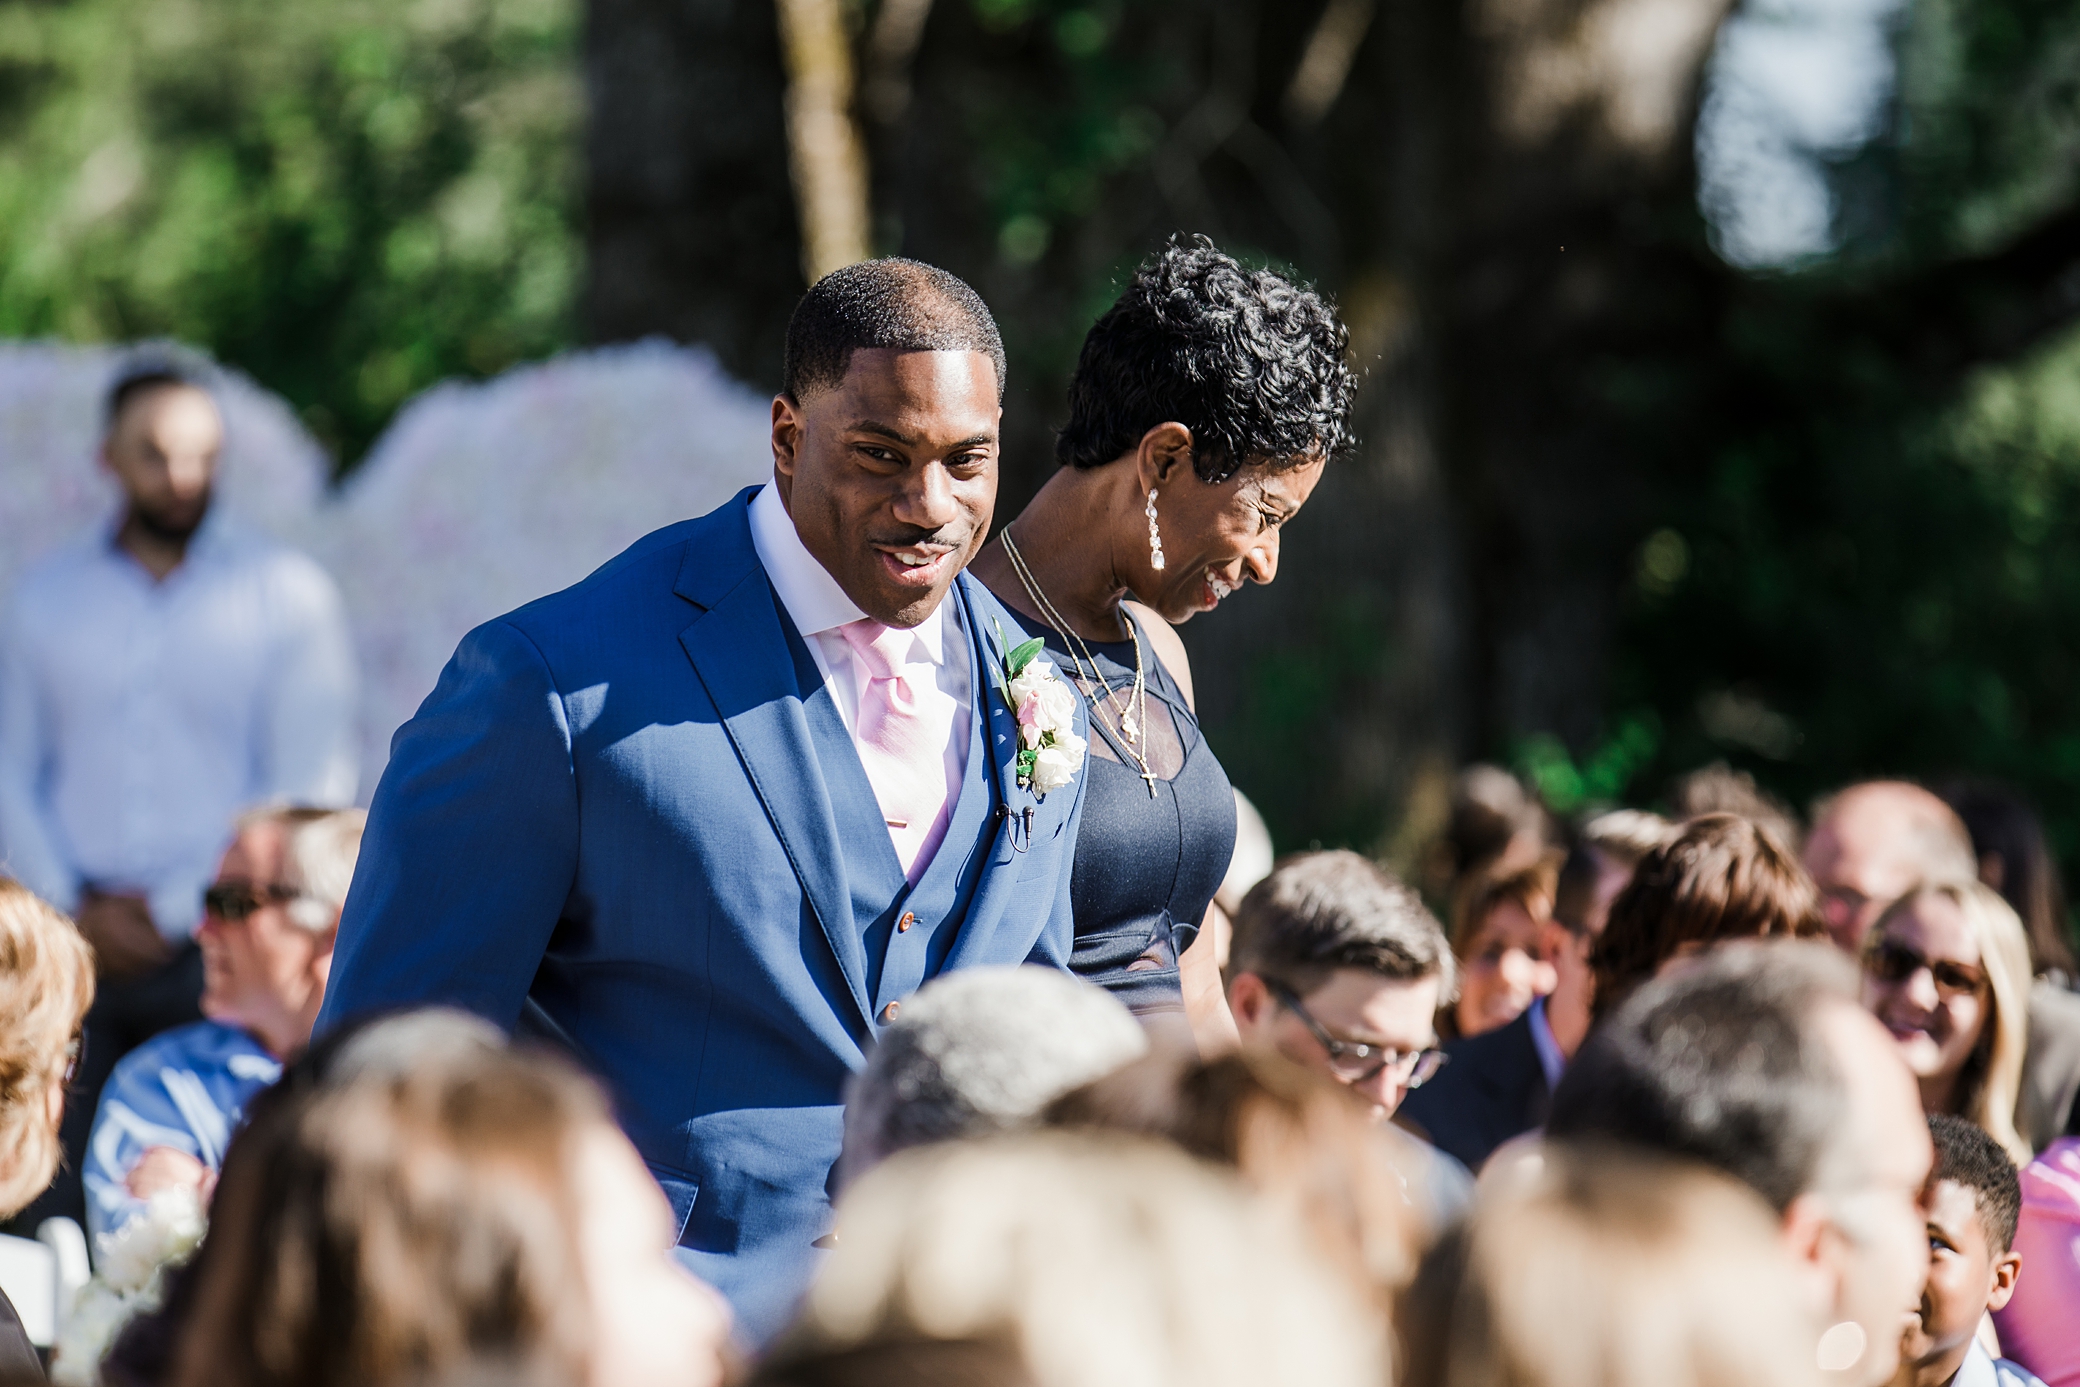 Groom and his mother walking down the aisle | Megan Montalvo Photography